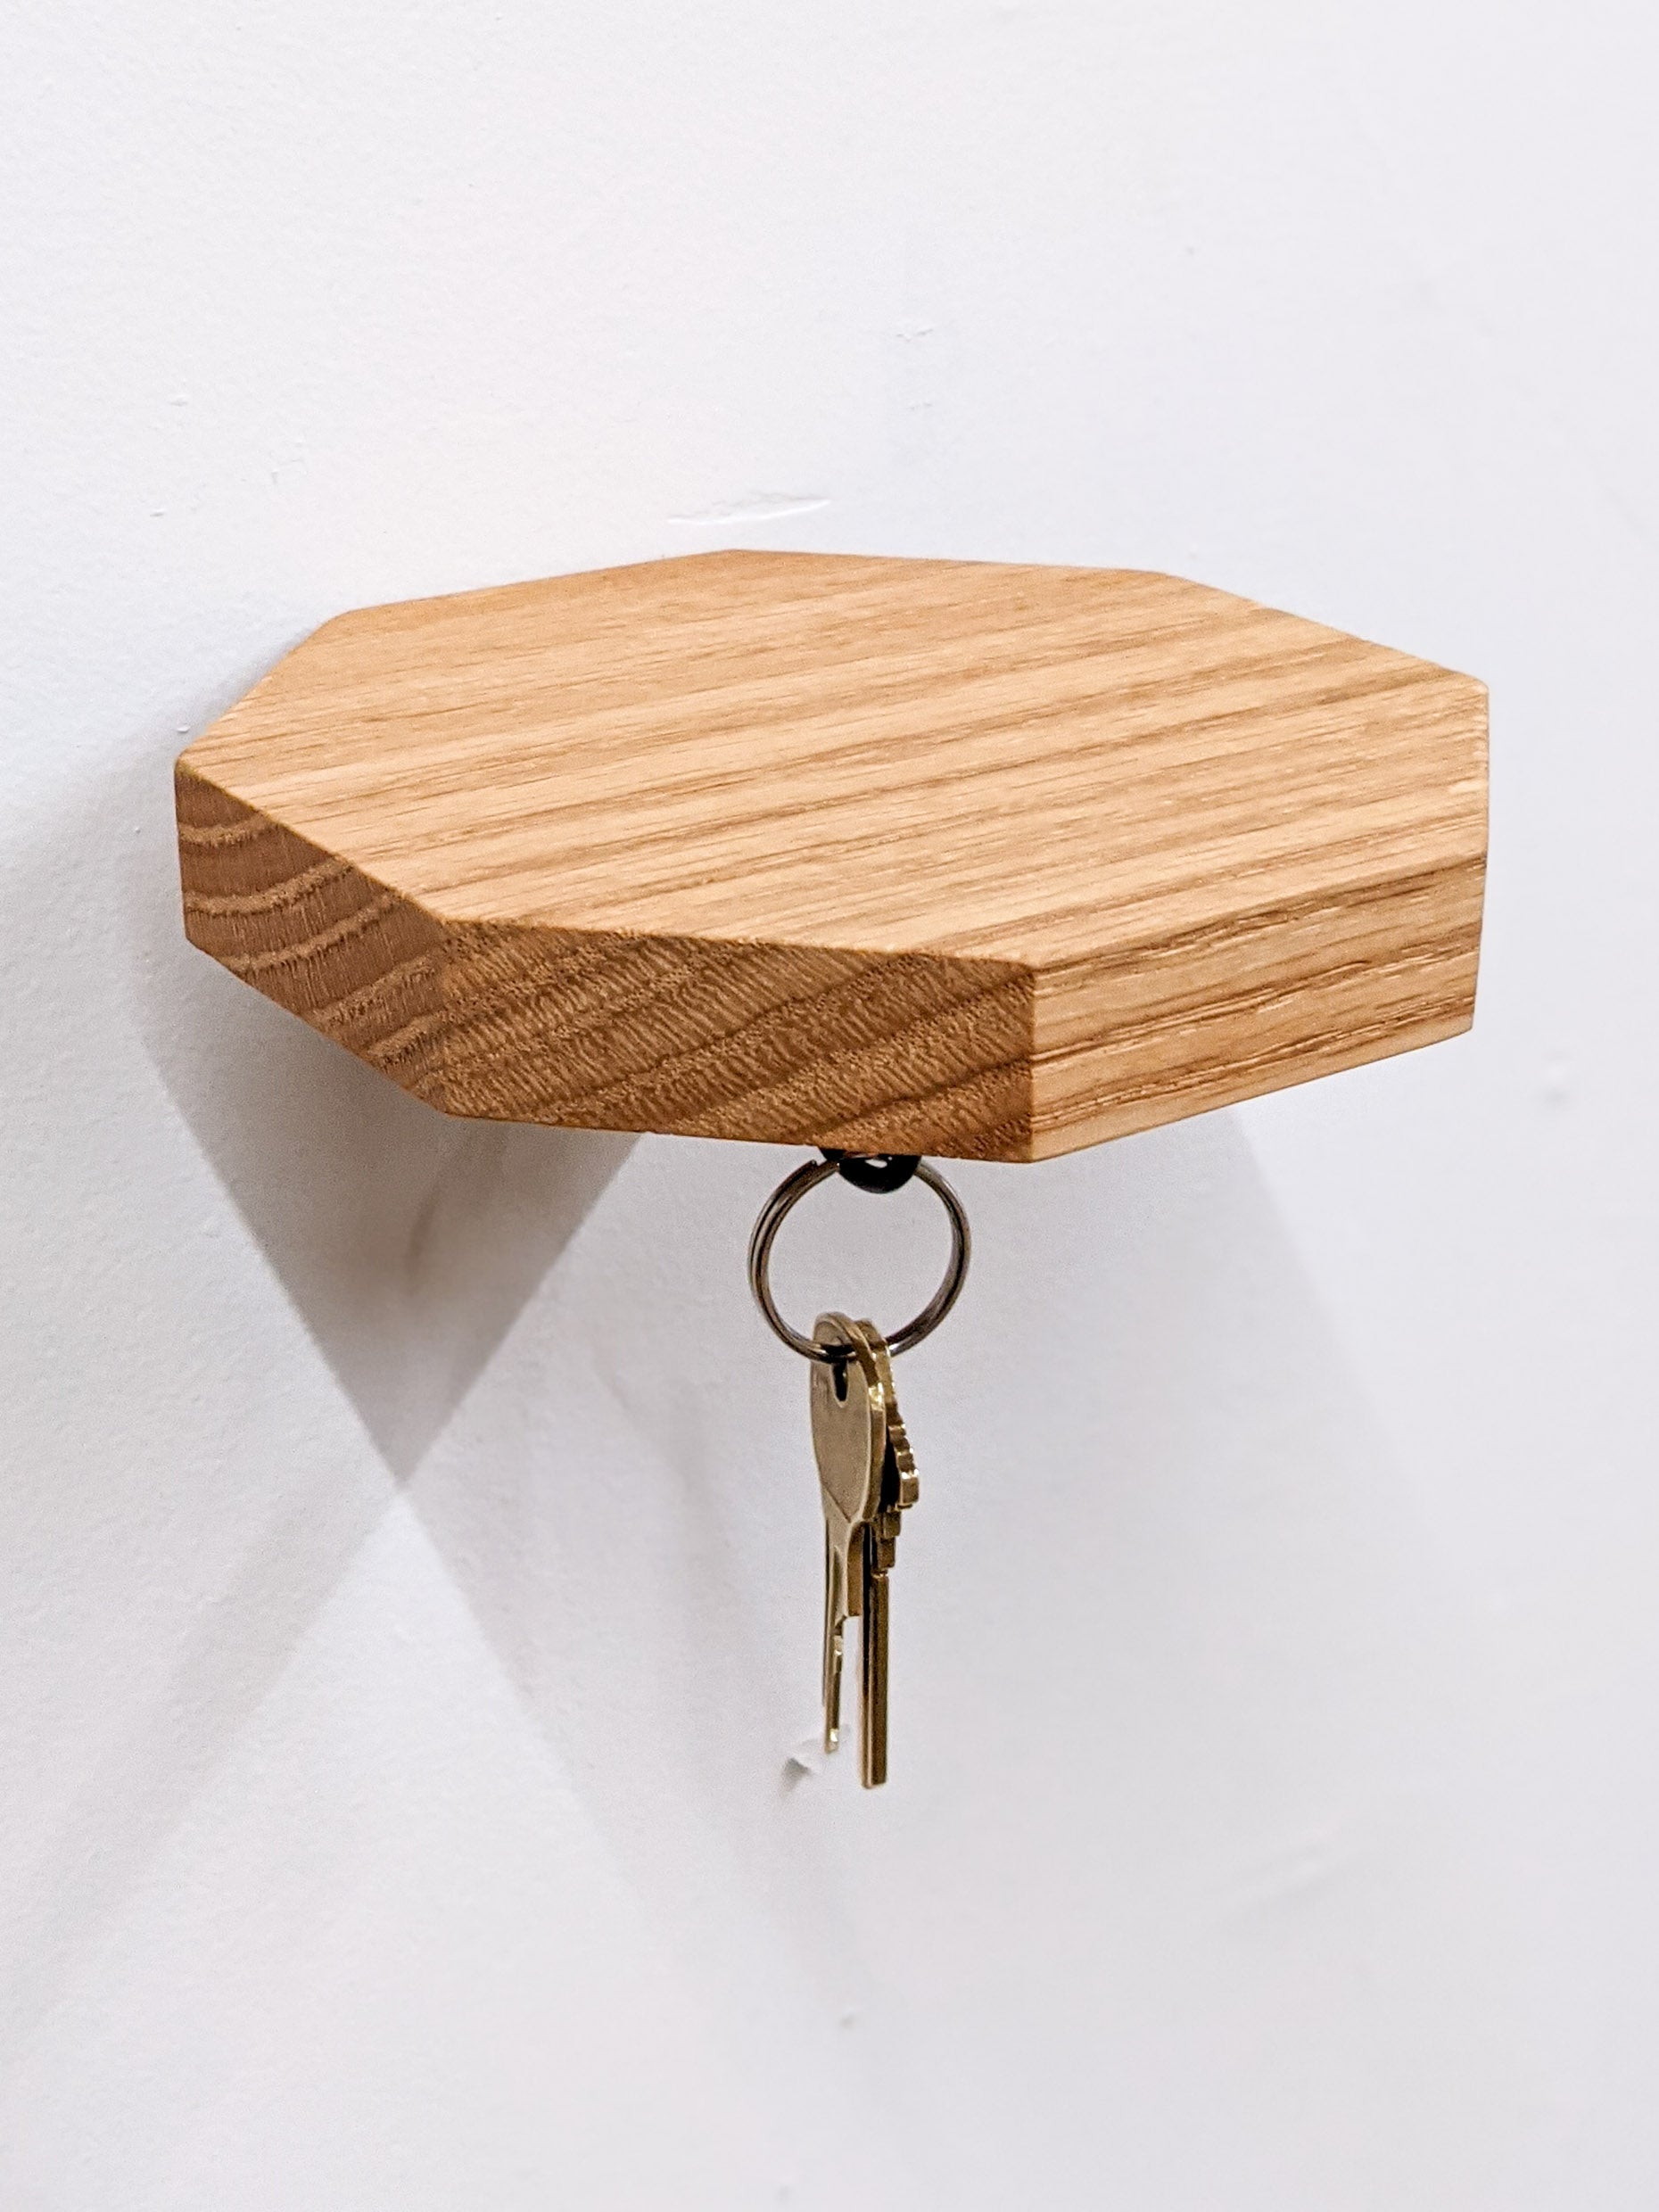 A floating oak octagon key shelf has been successfully installed on a white wall. Two bronze keys dangle from a black key hook on the bottom. The top is empty allowing for an excellent view of the natural fine grain of the oak wood to shine.